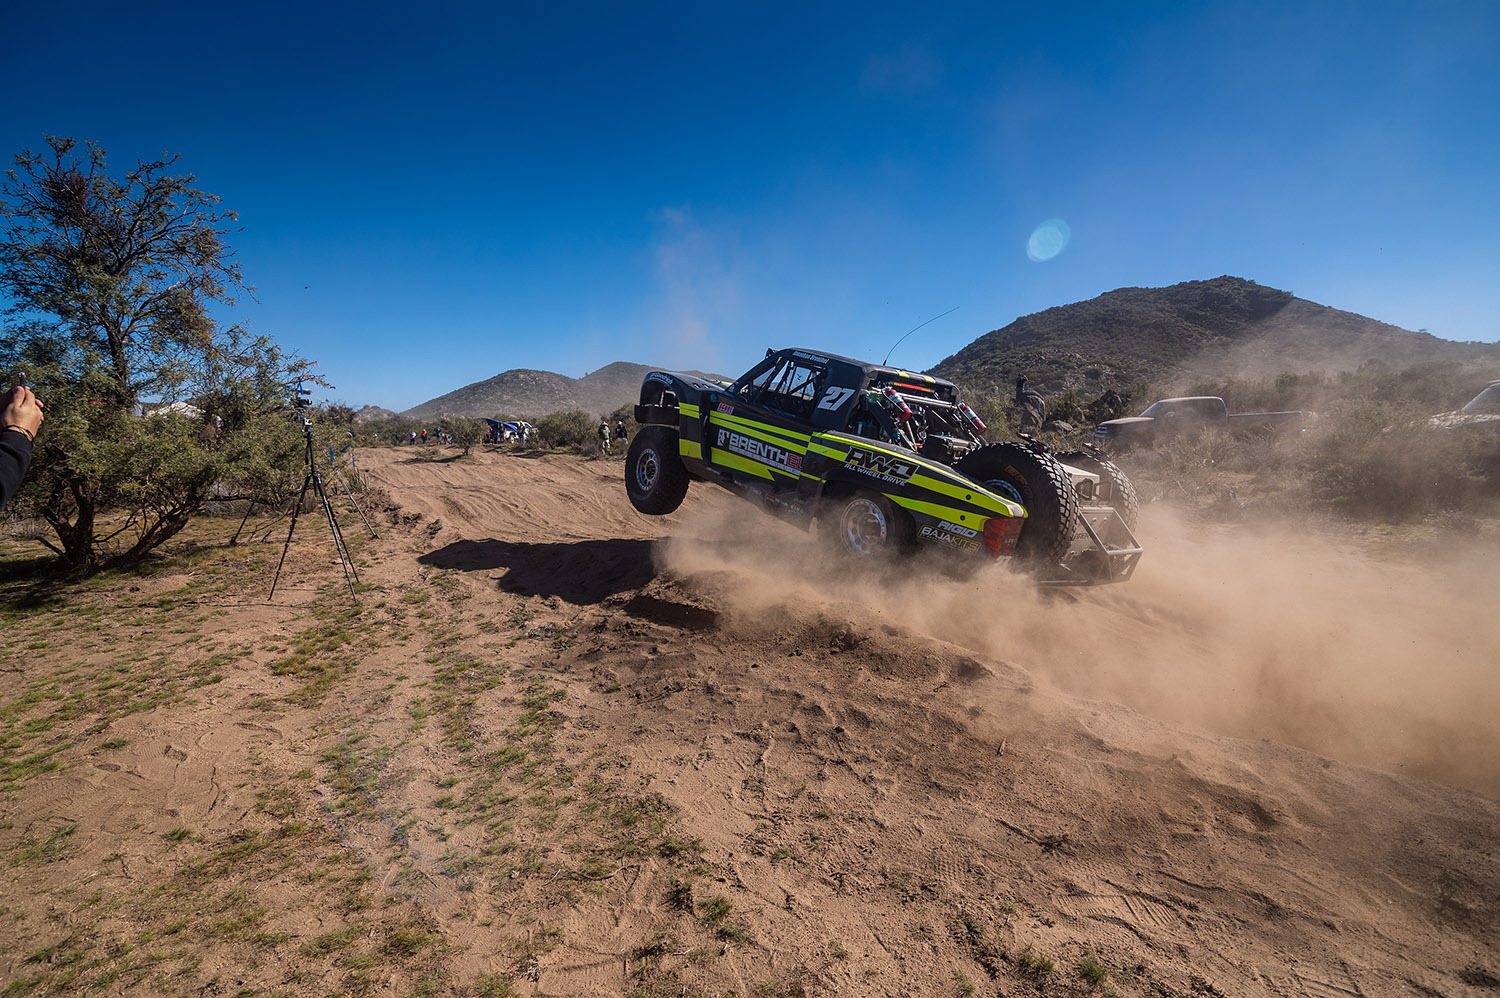 For Sale: Brenthel - RENT a AWD Trophy Truck! - photo2